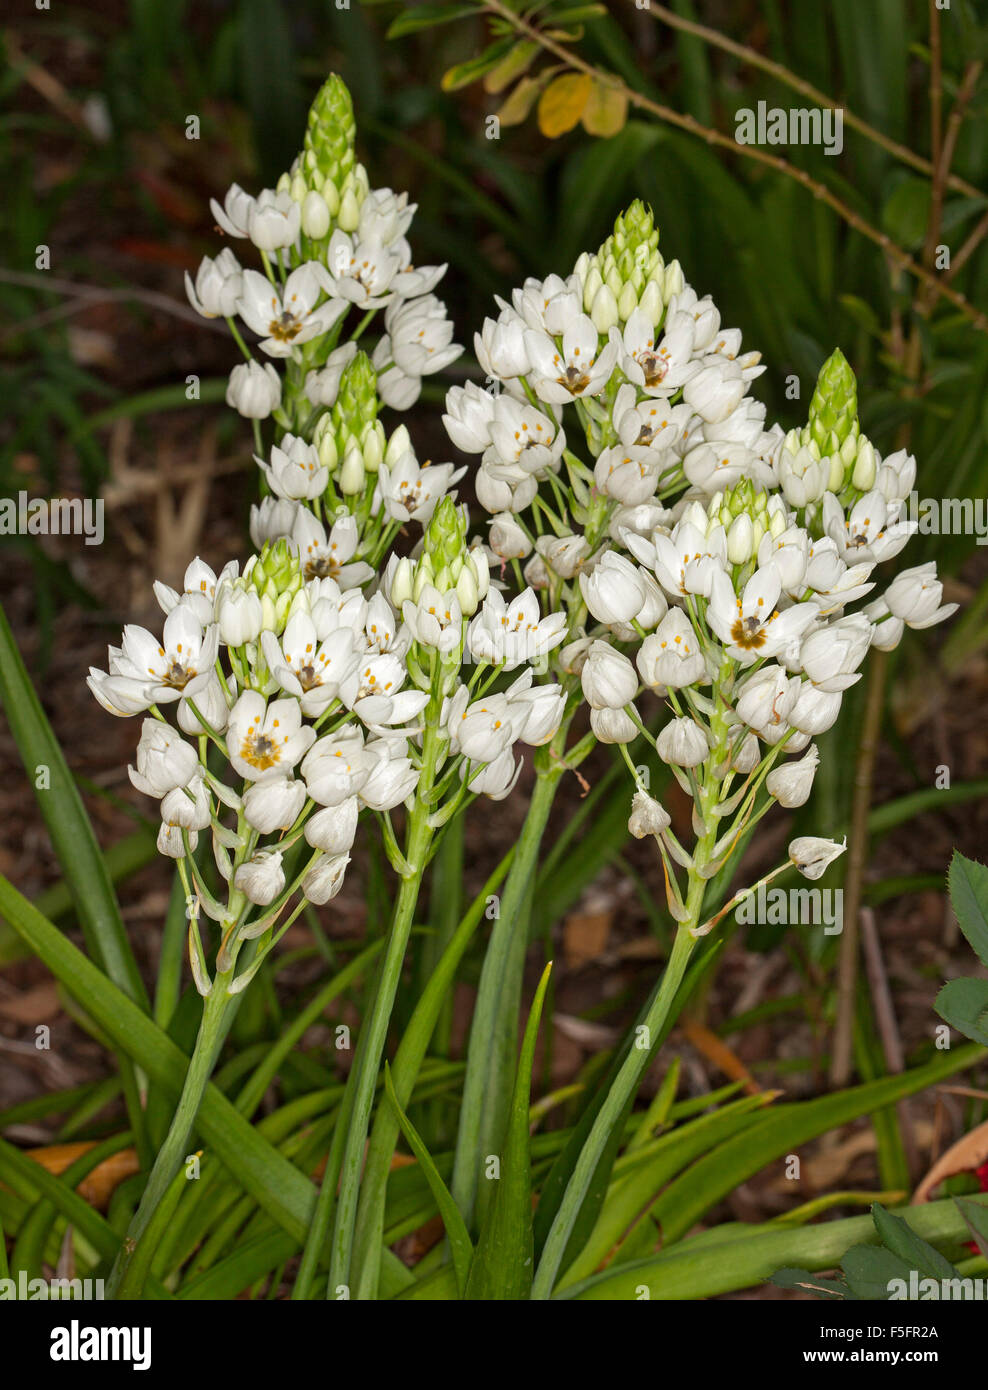 Cluster of white flowers and emerald green leaves of Ornithogalum dubium, Star of Bethlehem, bulbous plant on dark background Stock Photo